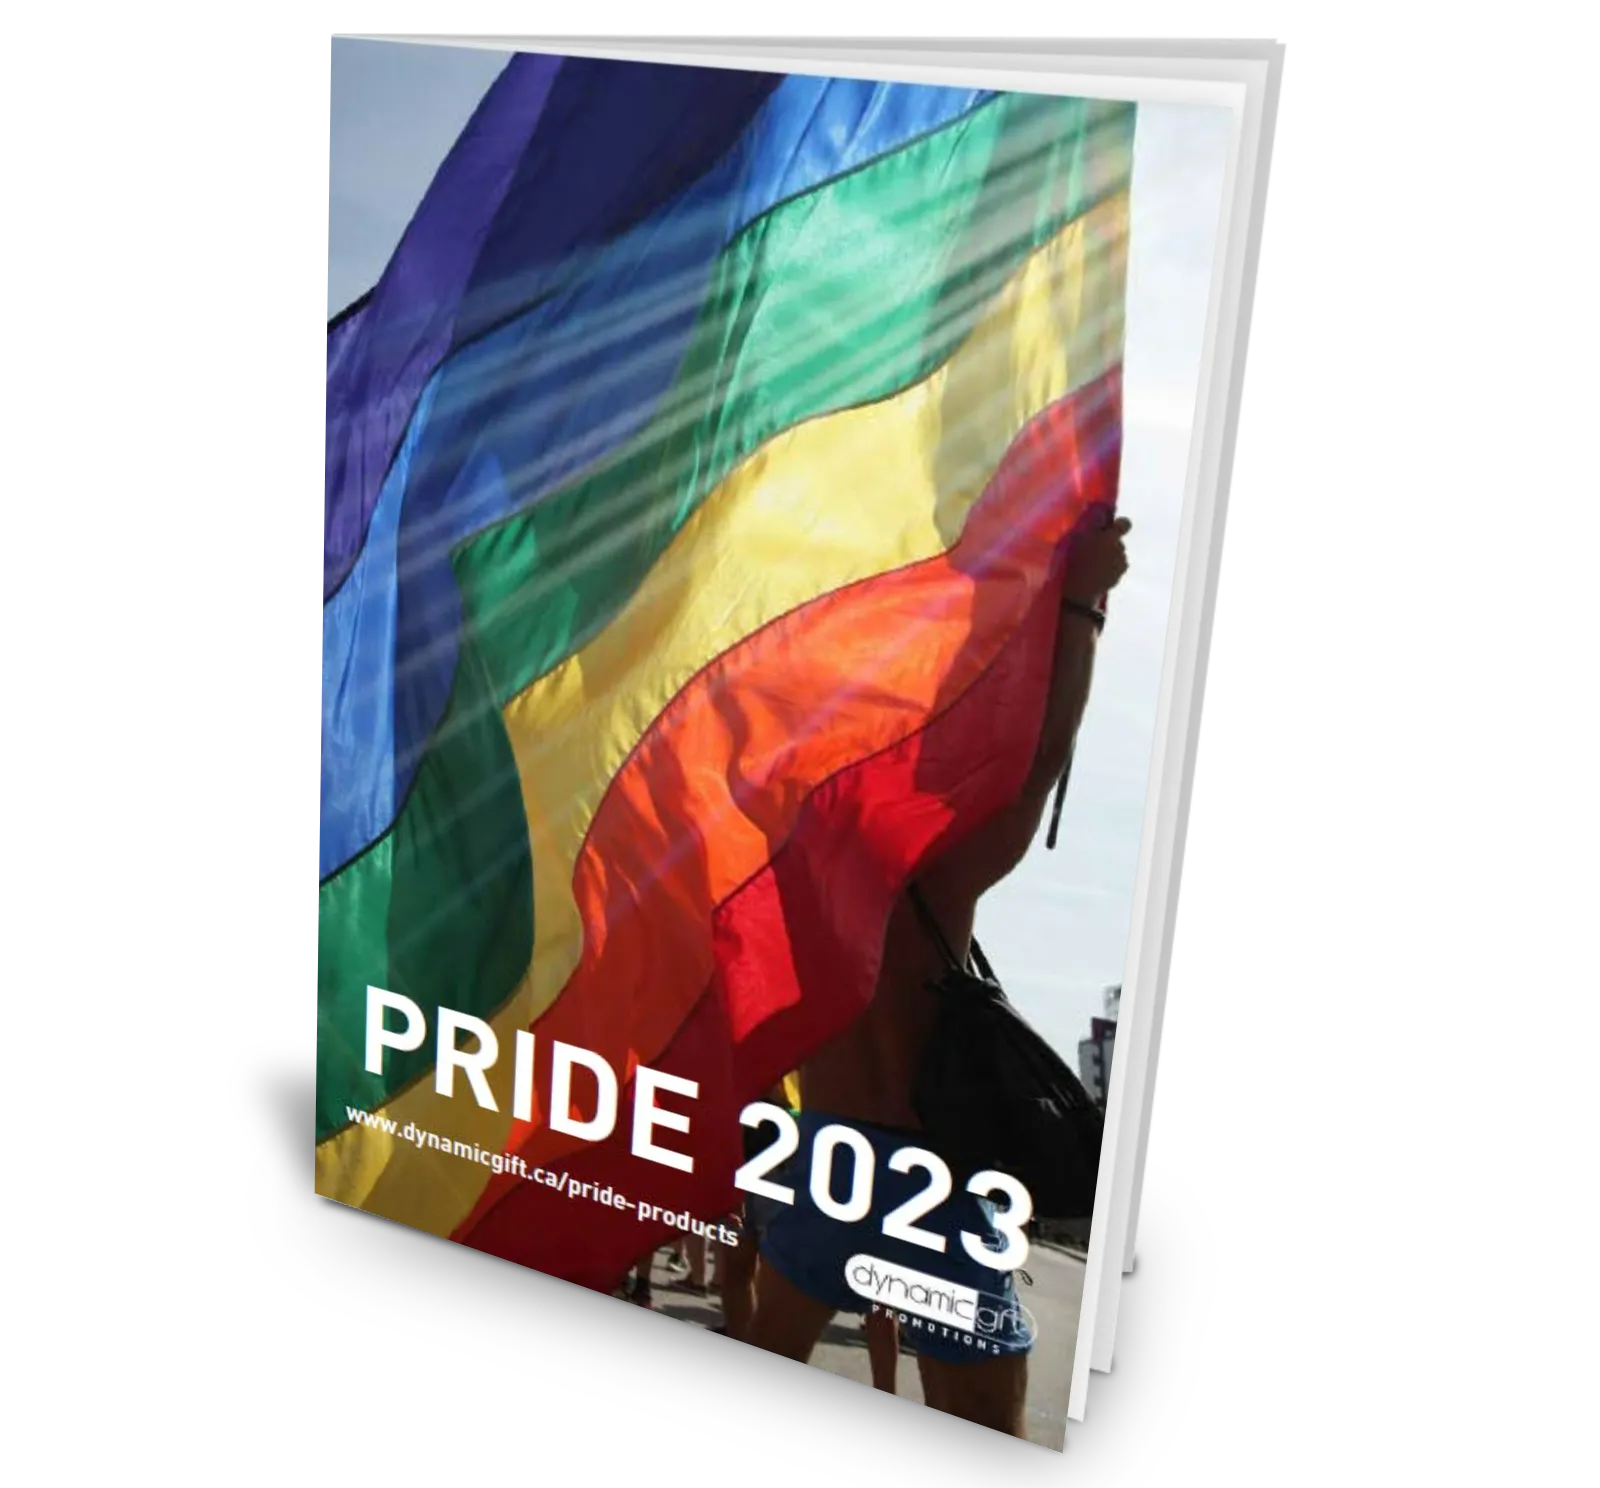 Pride Essentials 223 catalogue by Dynamic Gift